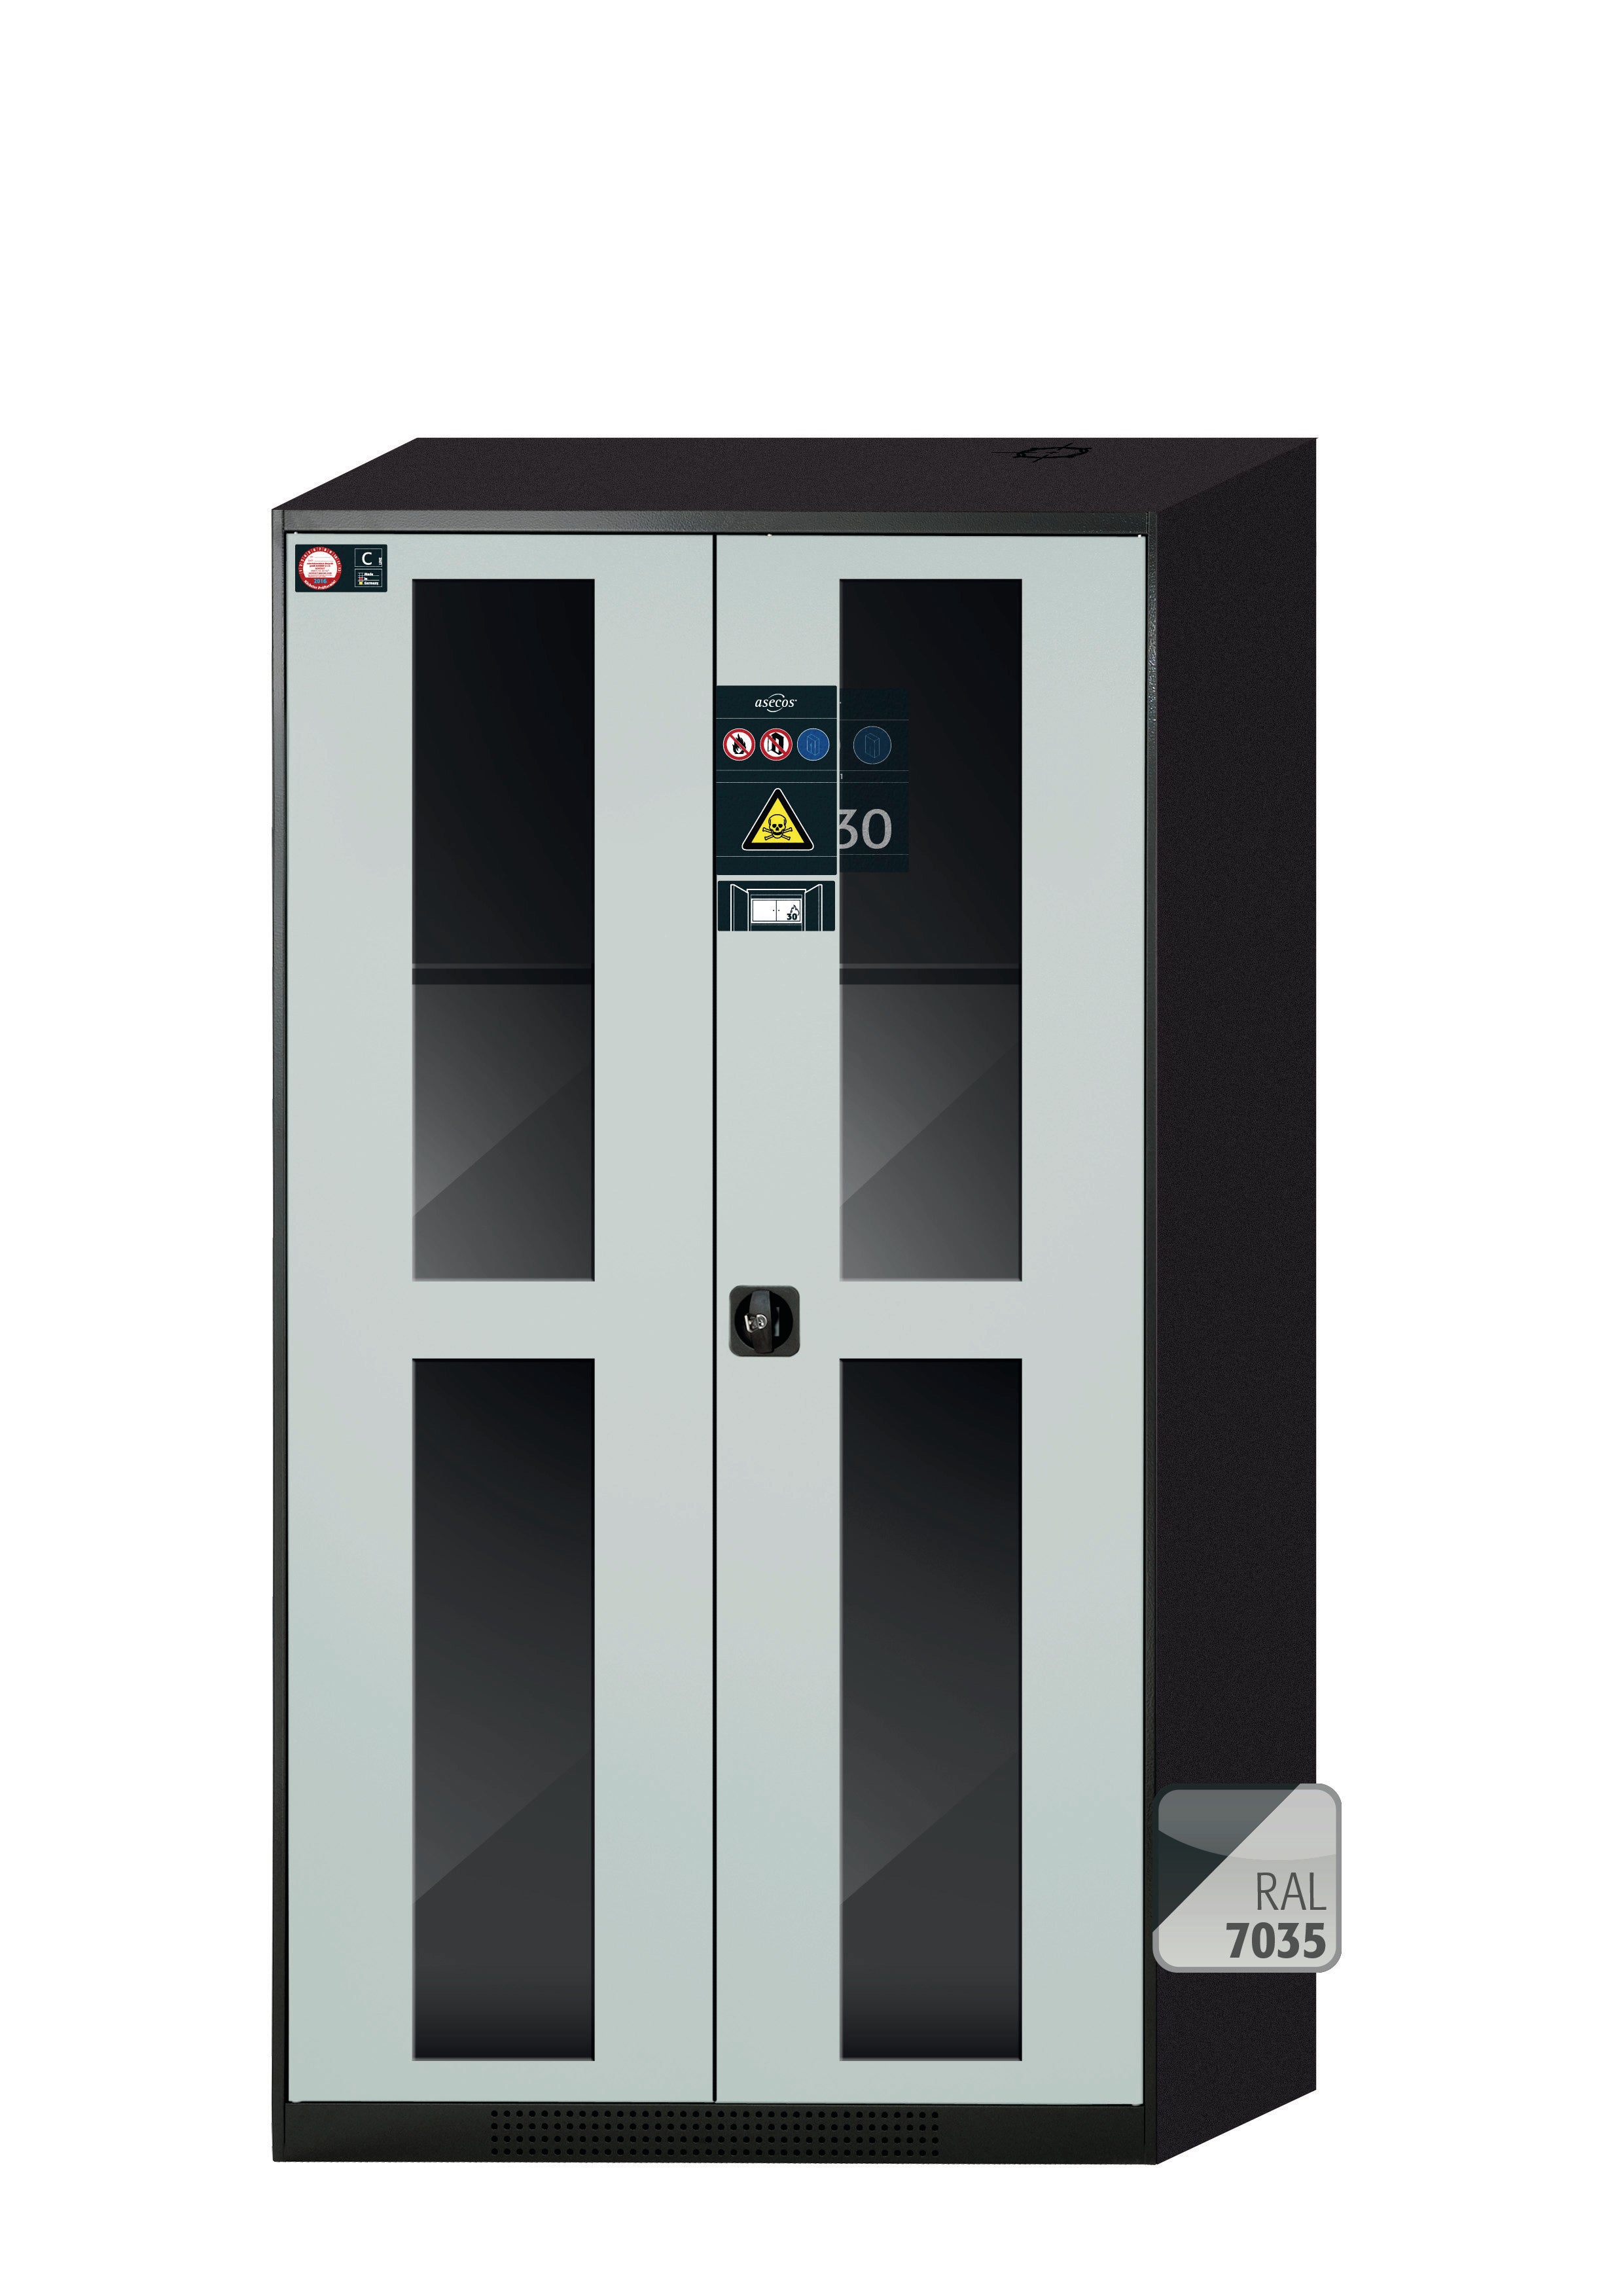 Chemical cabinet with type 30 safety box CS-CLASSIC-GF model CS.195.105.F.WDFW in light gray RAL 7035 with 2x standard shelves (sheet steel)